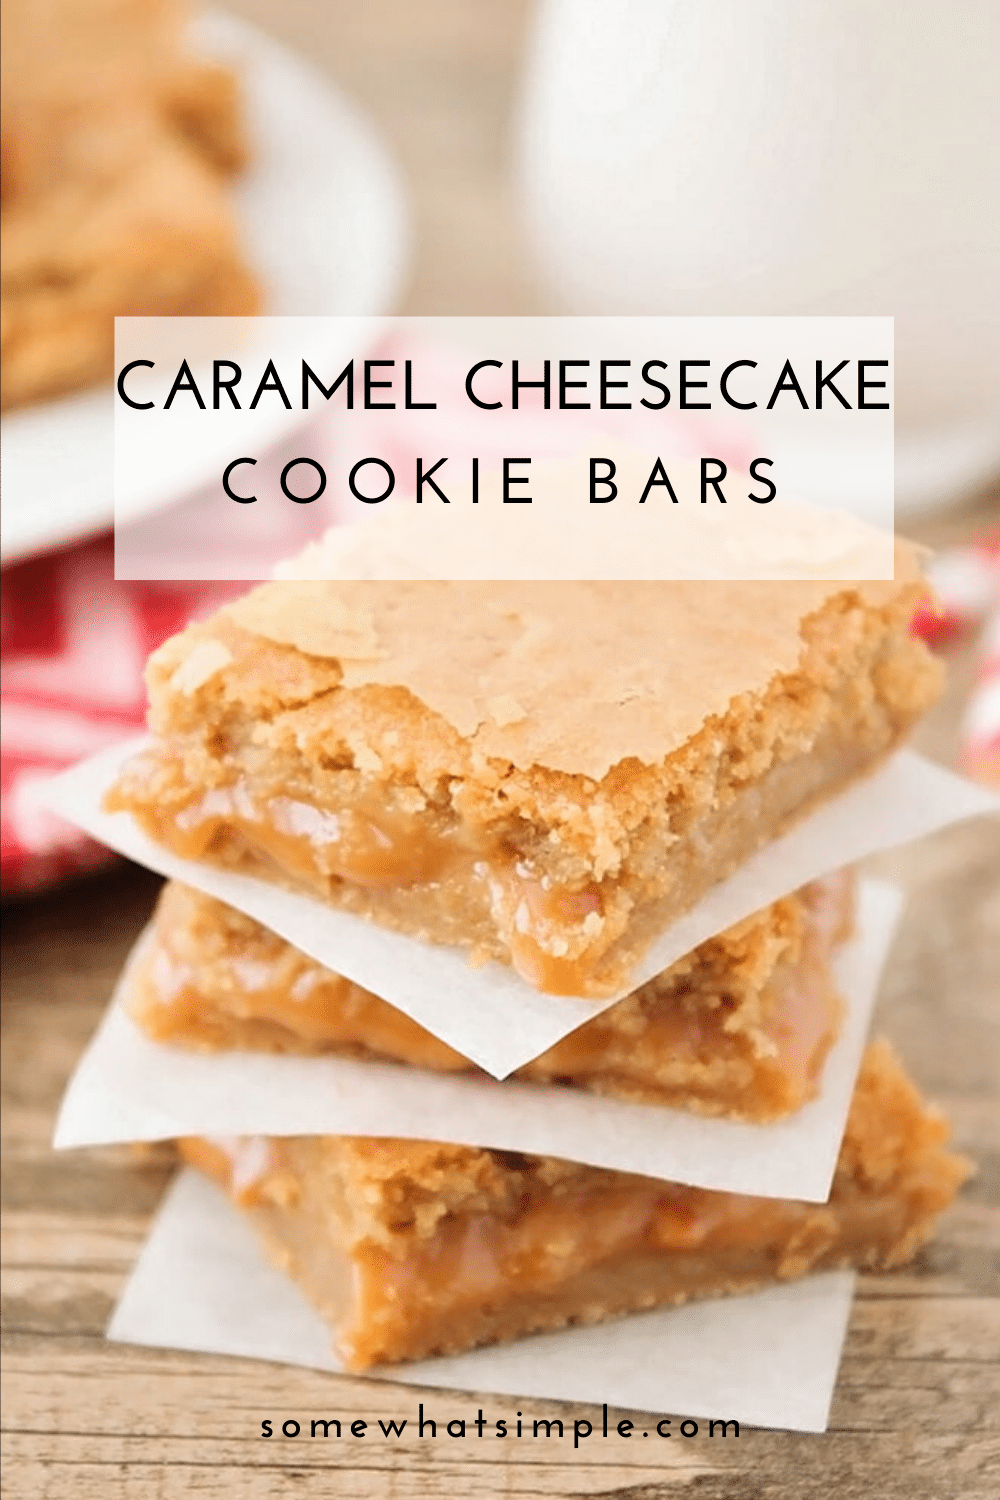 Caramel cheesecake cookie bars are a delicious salty & sweet dessert that's super easy to make! All of the delicious cheesecake flavors drizzled with caramel, all in an amazing cookie bar. This recipe is easy to make and is guaranteed to knock your socks off. via @somewhatsimple